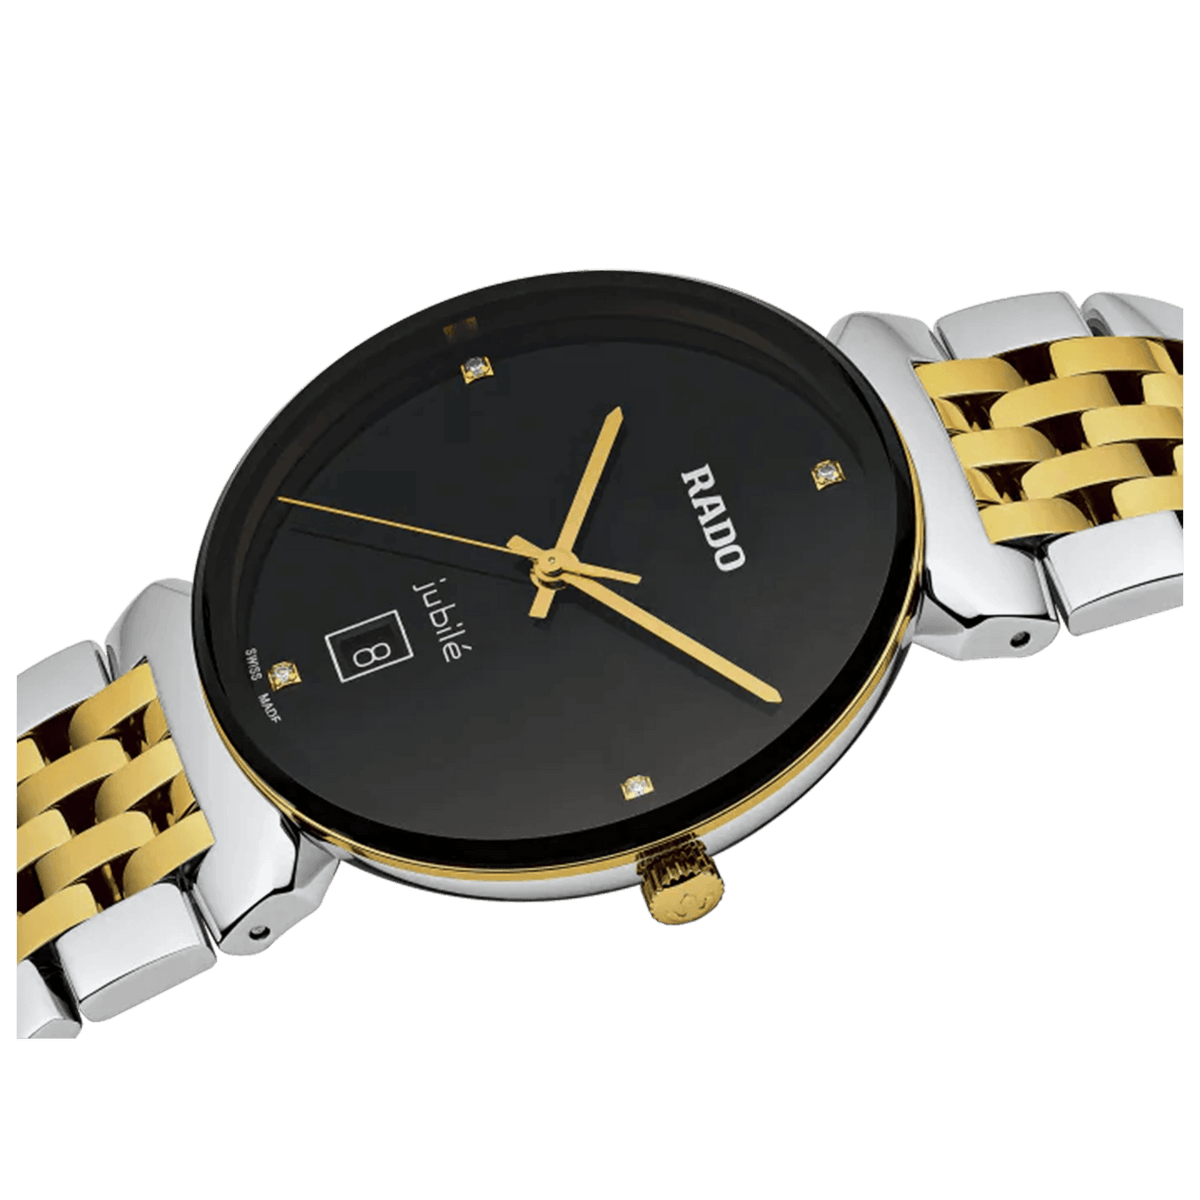 Rado Florence Men's 38mm Stainless Steel & Gold Plated Quartz Watch R48912703 - Wallace Bishop